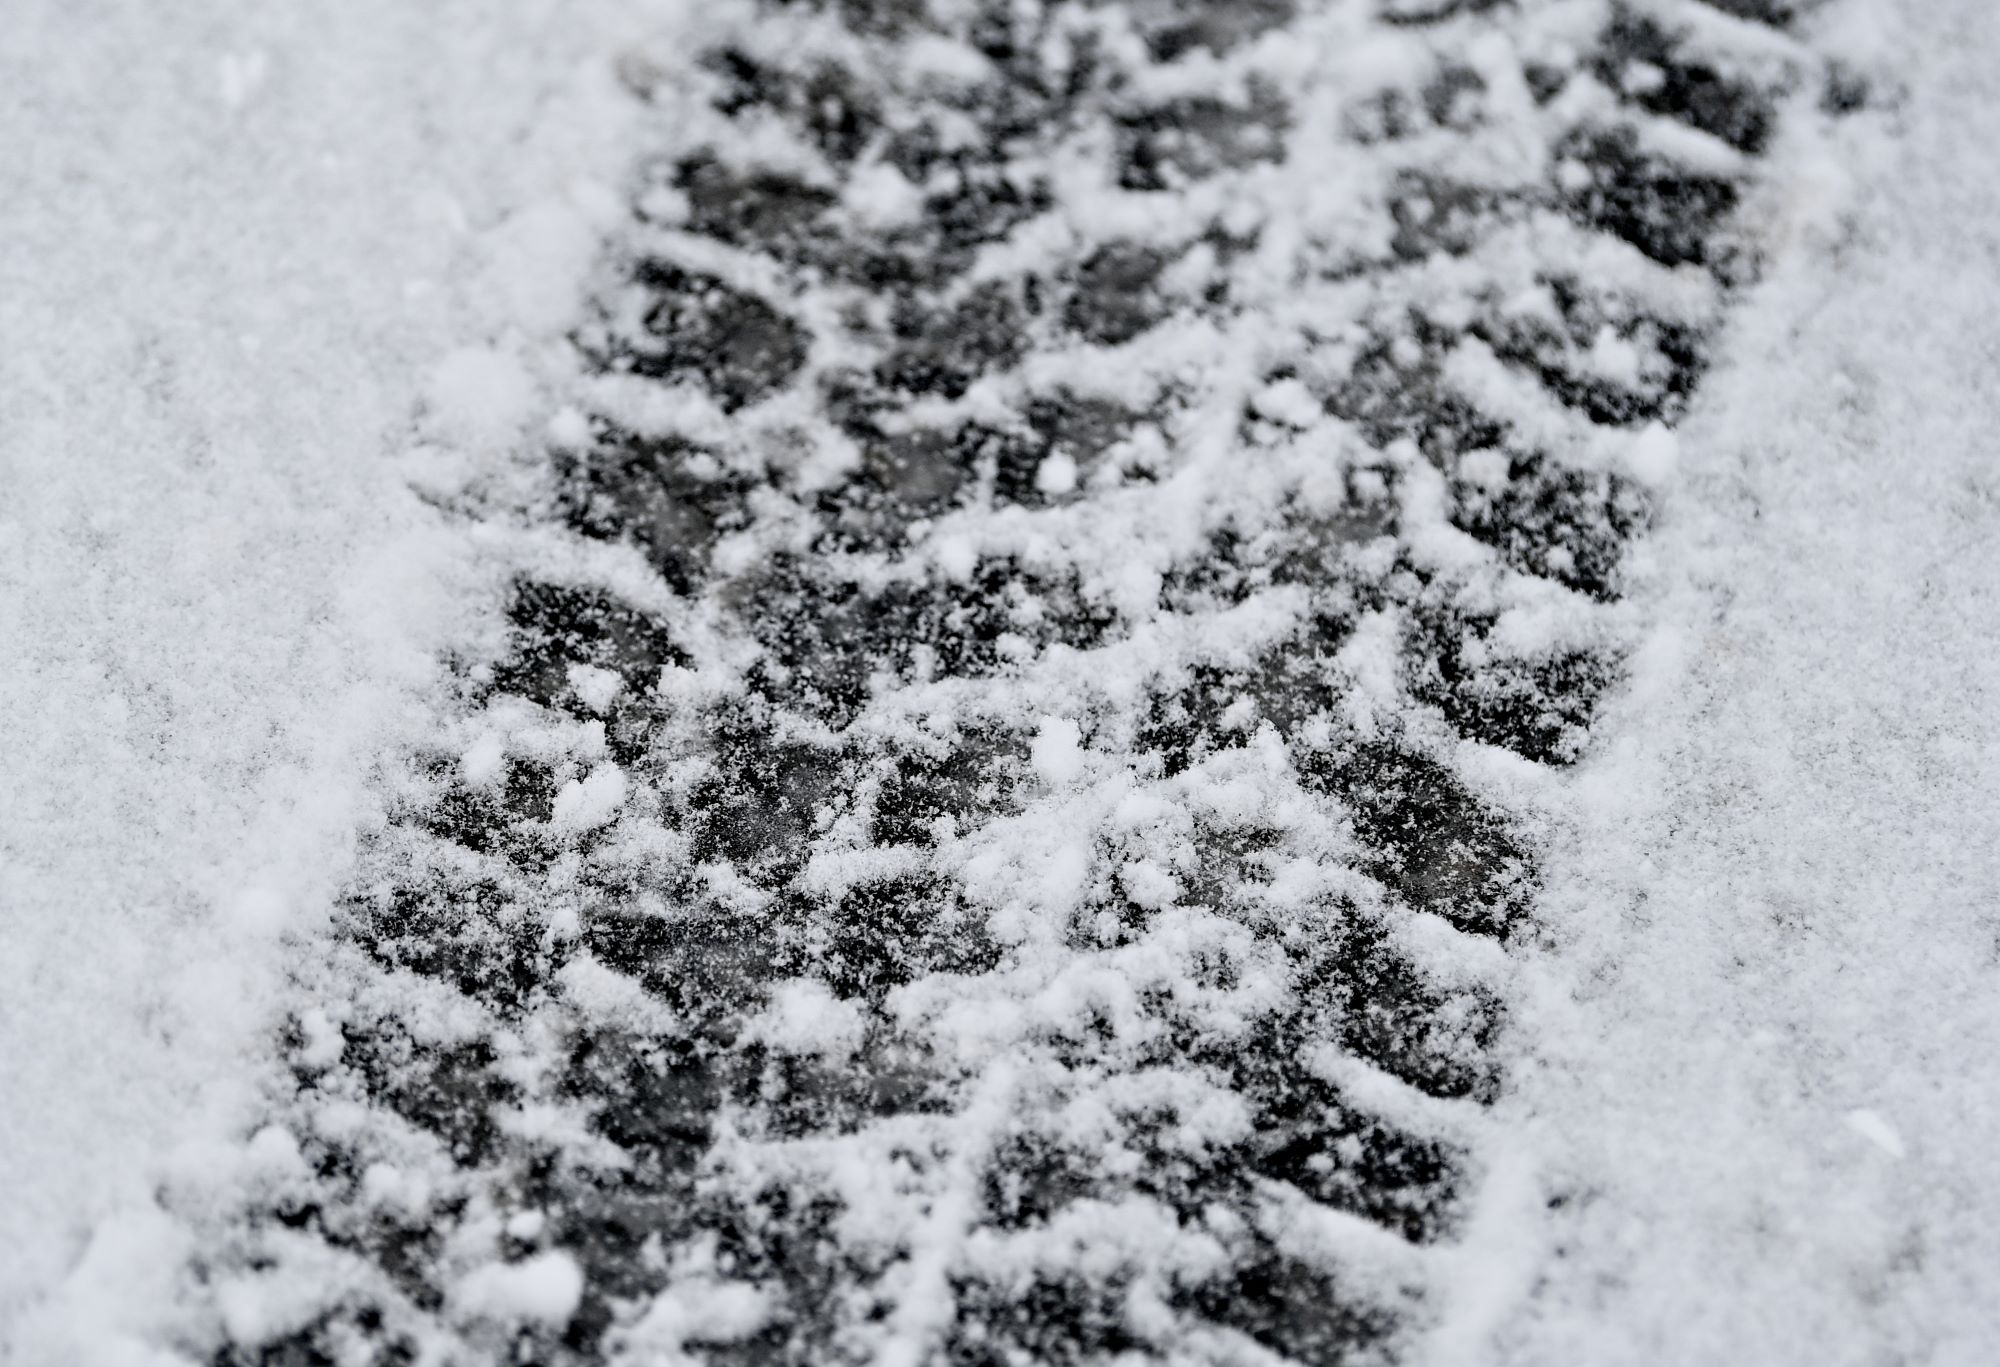 A snow tire print in the snow.